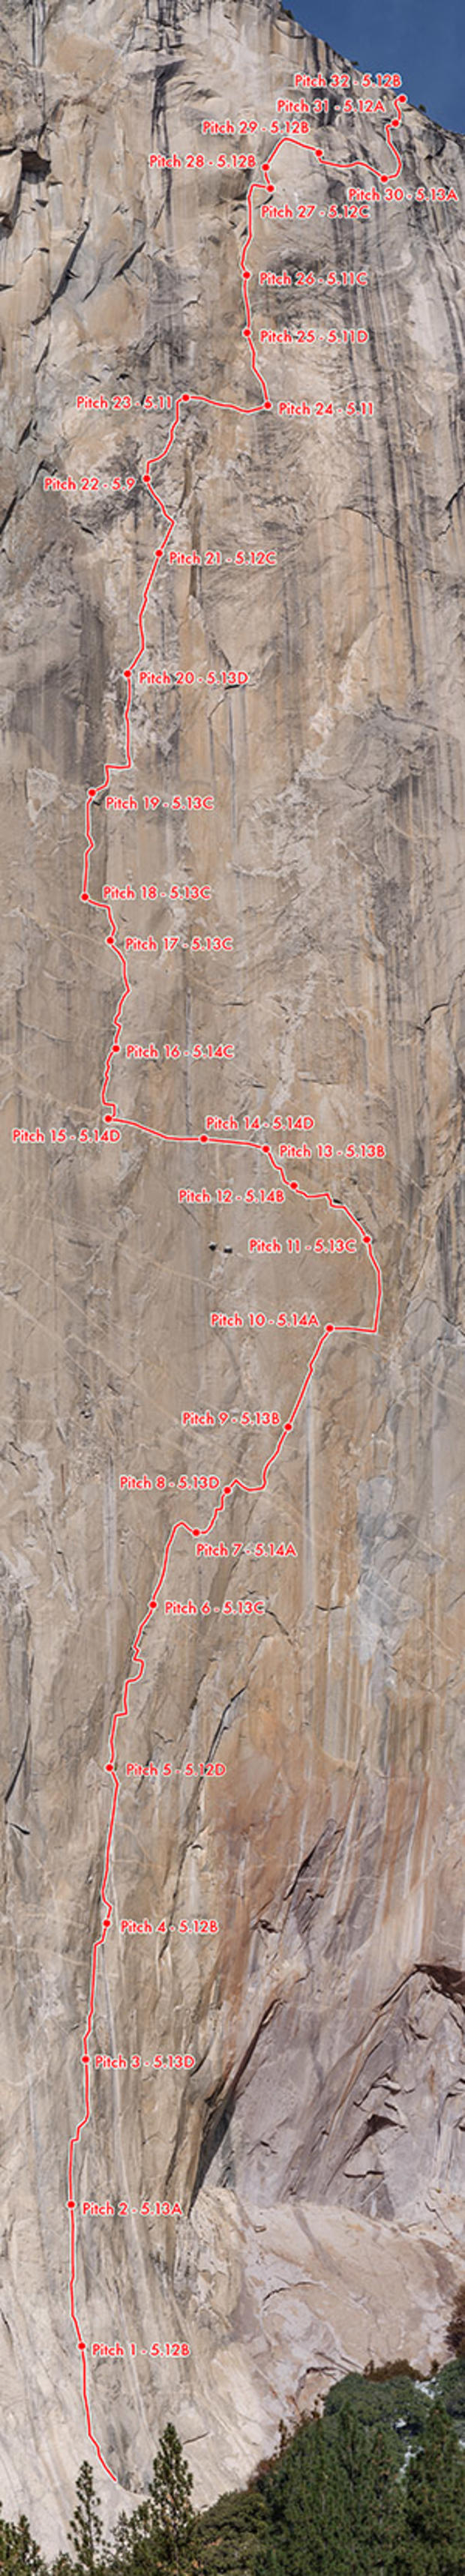 dawn-wall-with-route-300.jpg 